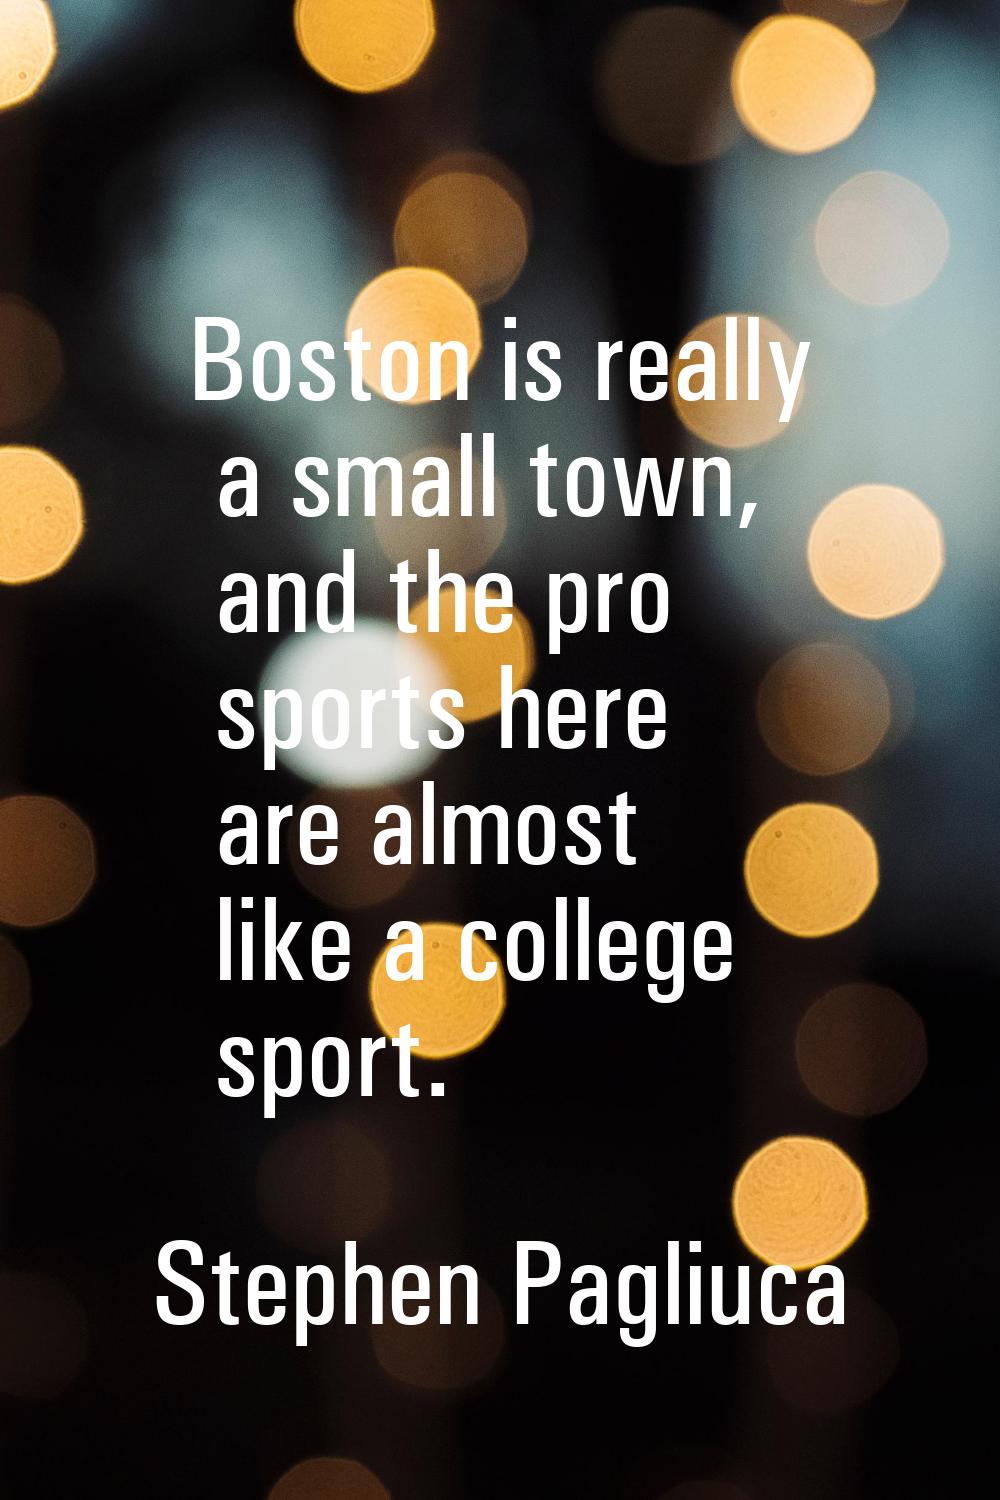 Boston is really a small town, and the pro sports here are almost like a college sport.